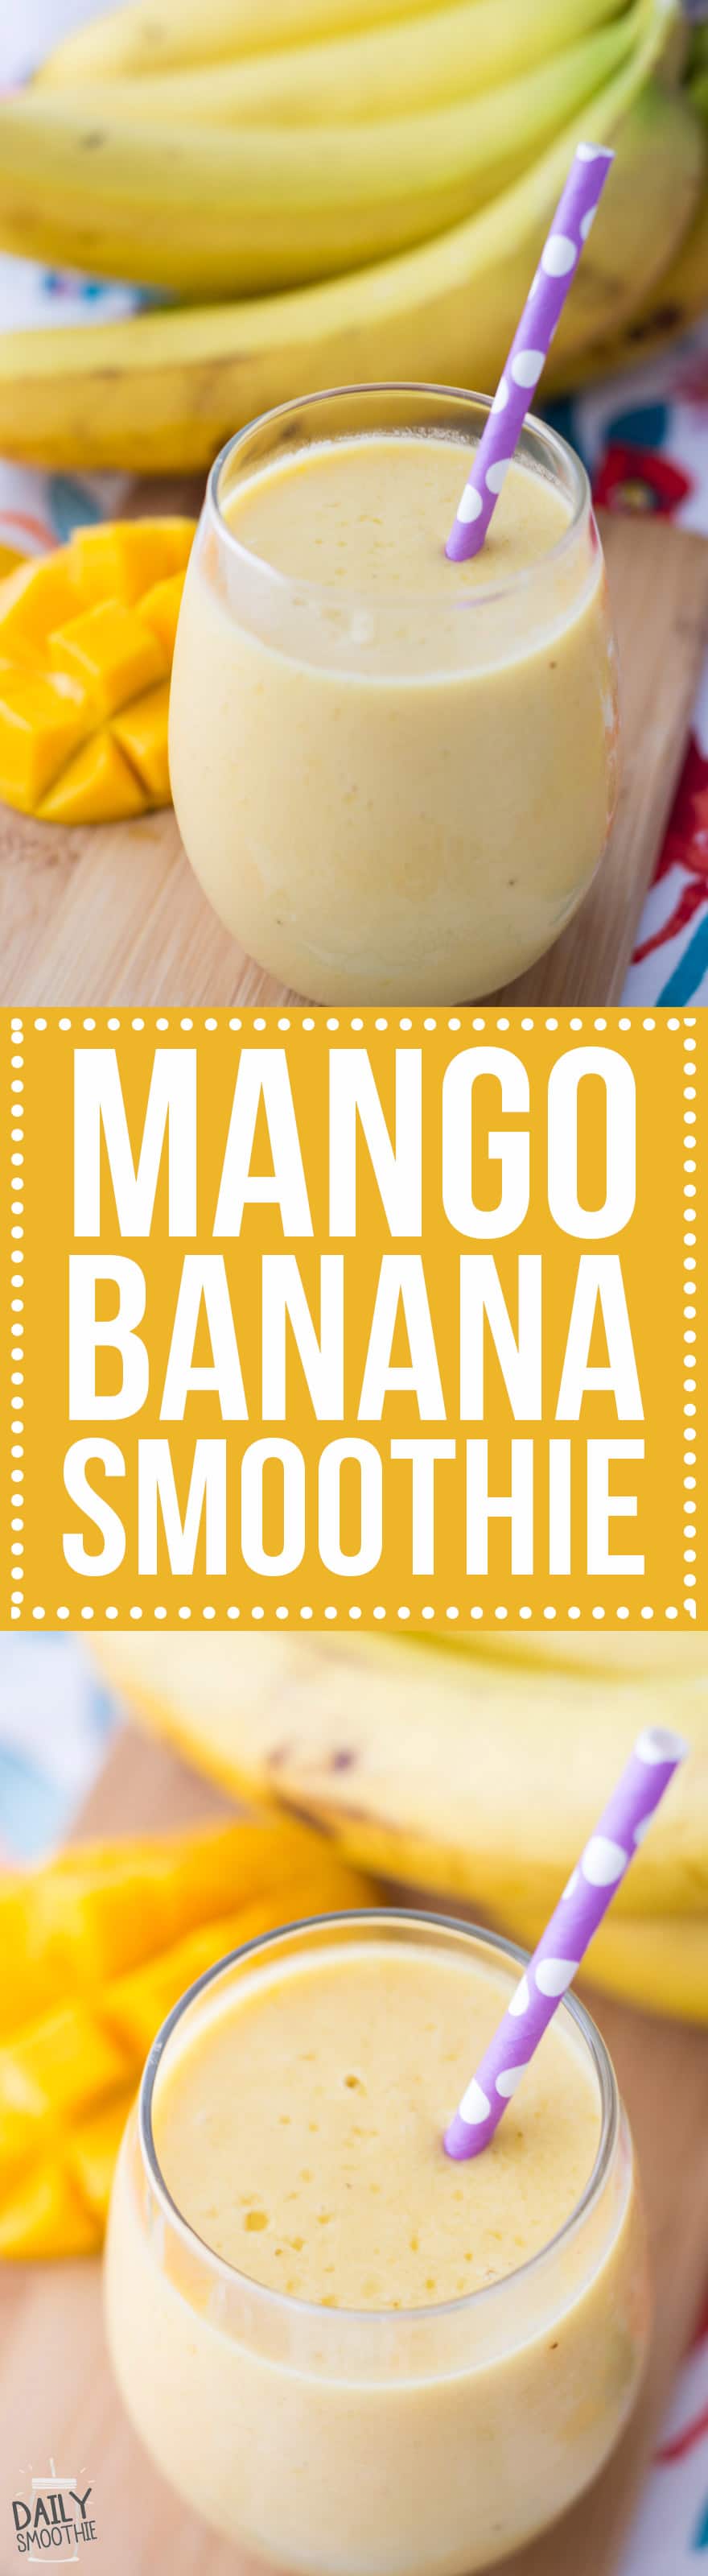 This mango banana smoothie recipe is creamy and delicious! This sweet smoothie will make you feel like you're in the tropics.